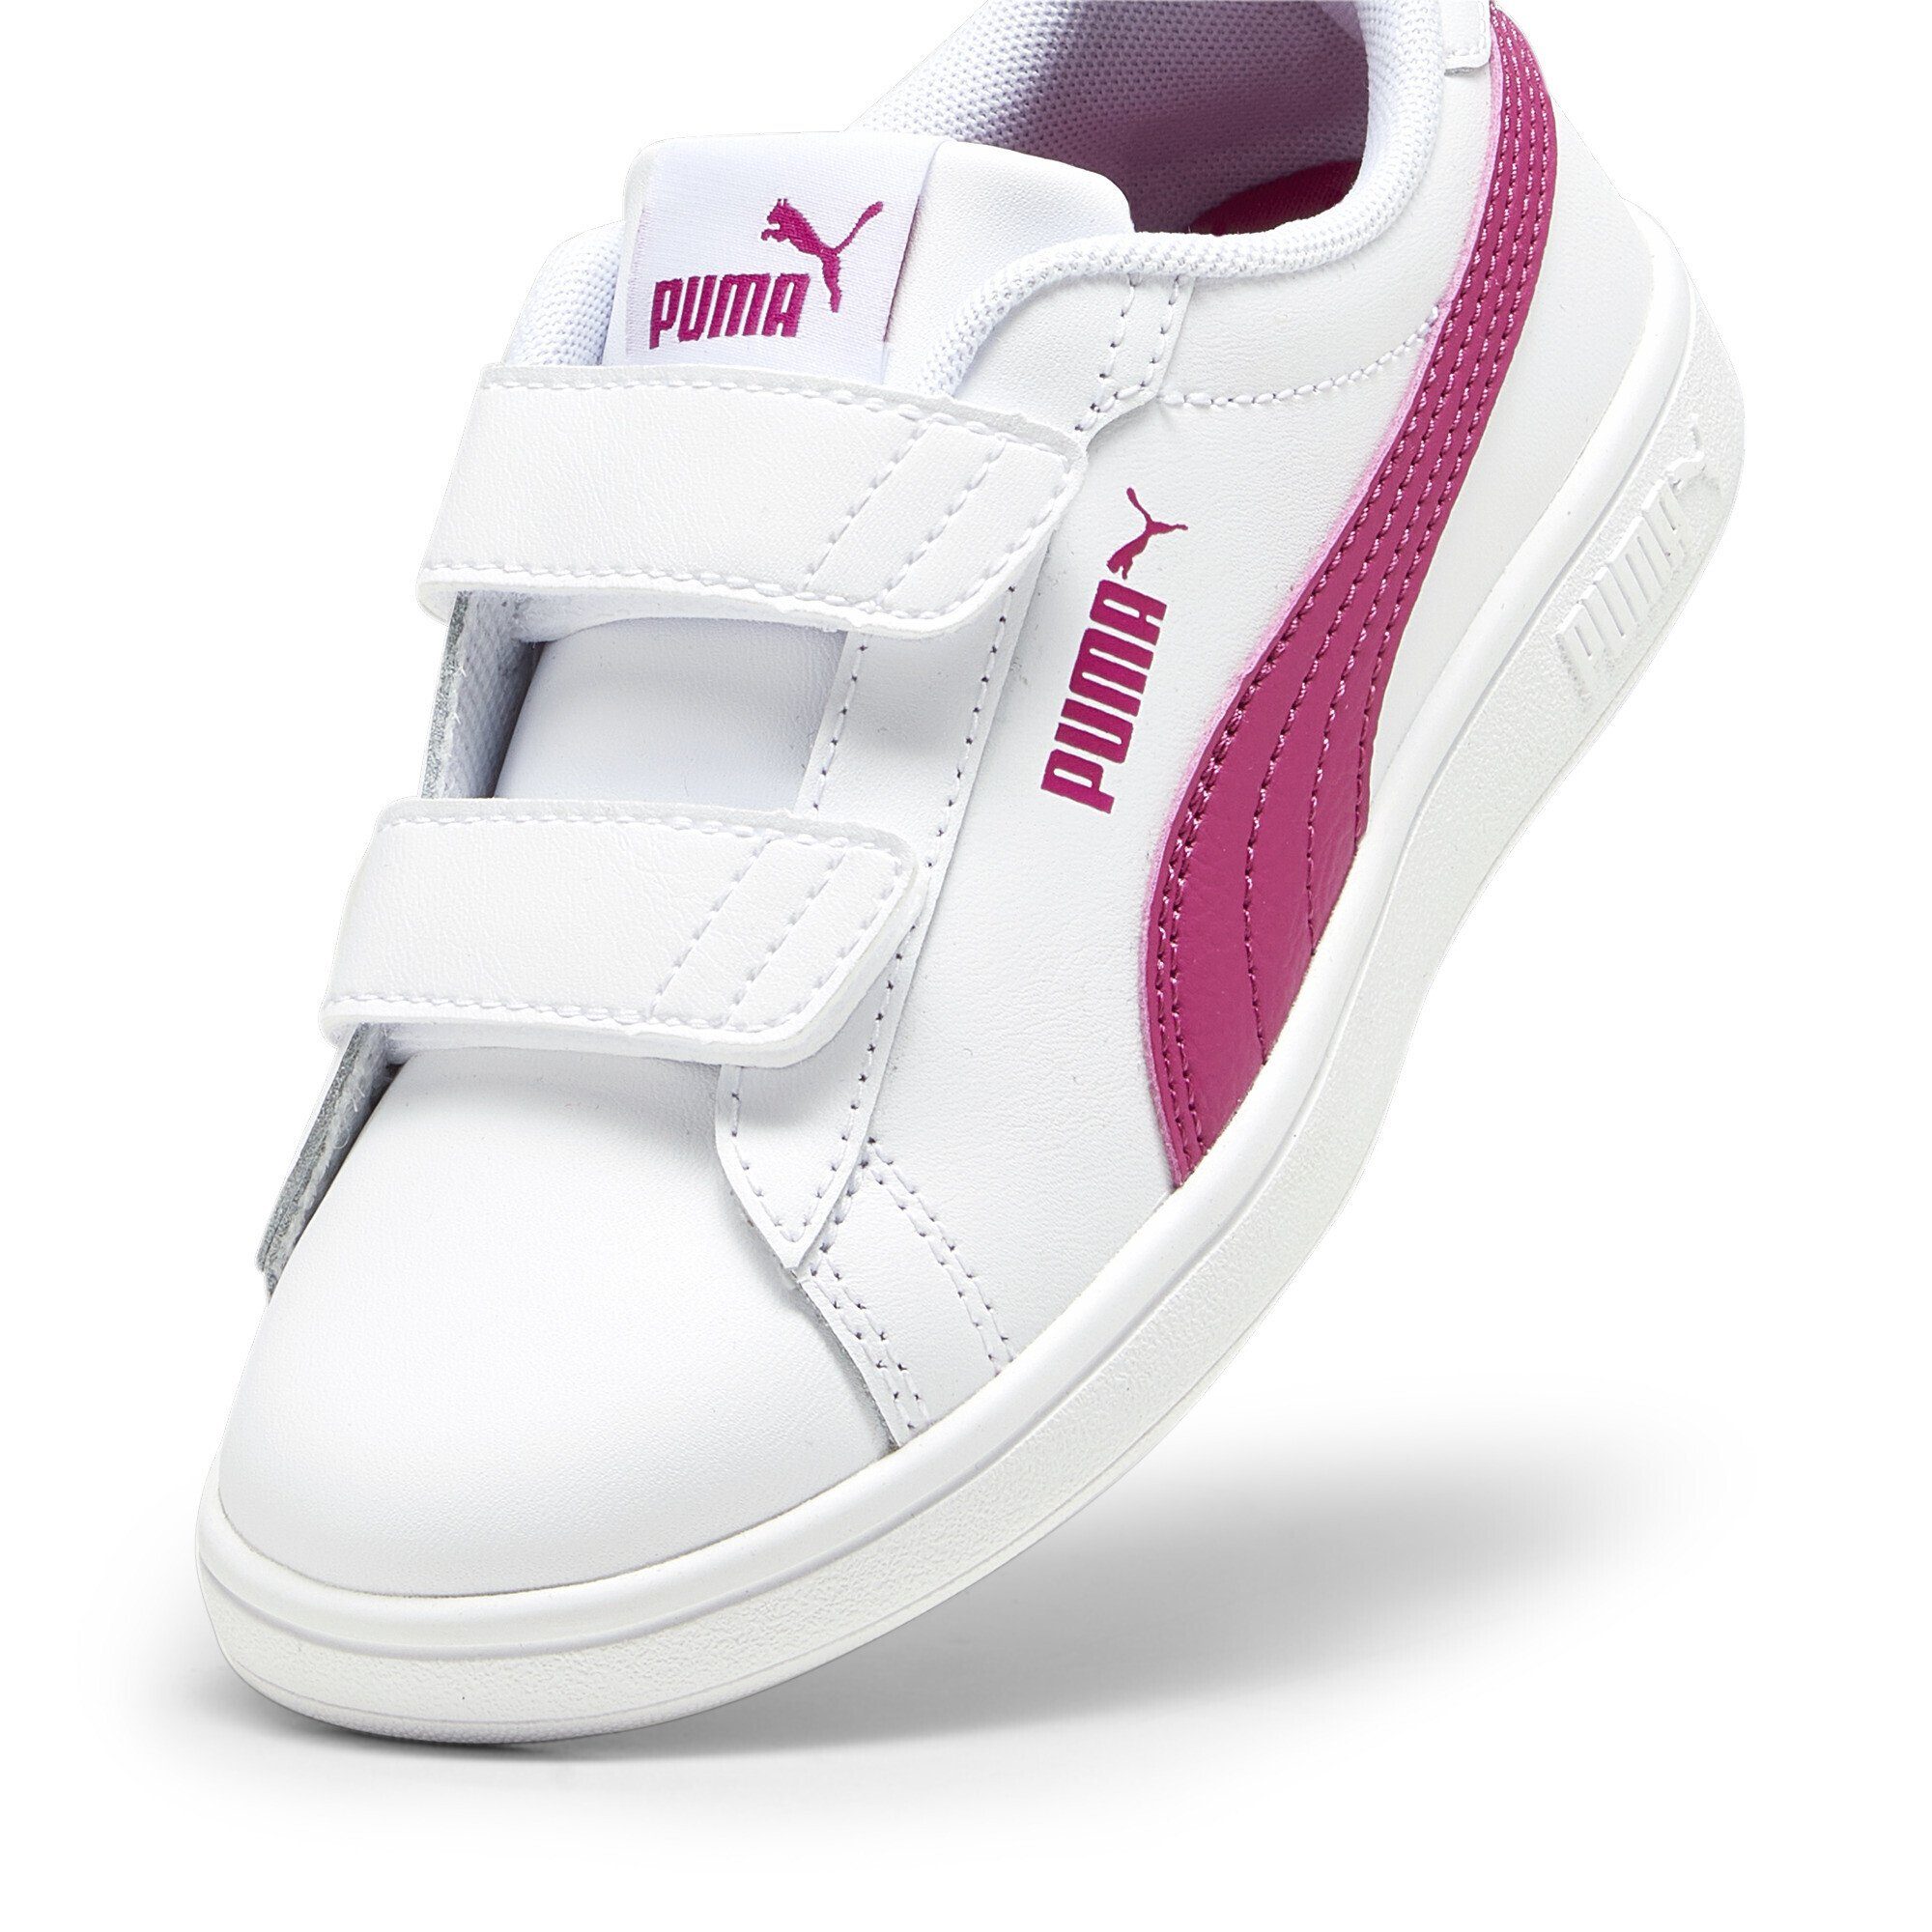 PUMA Smash 3.0 Leather Sneakers Pink Pinktastic White Sneaker